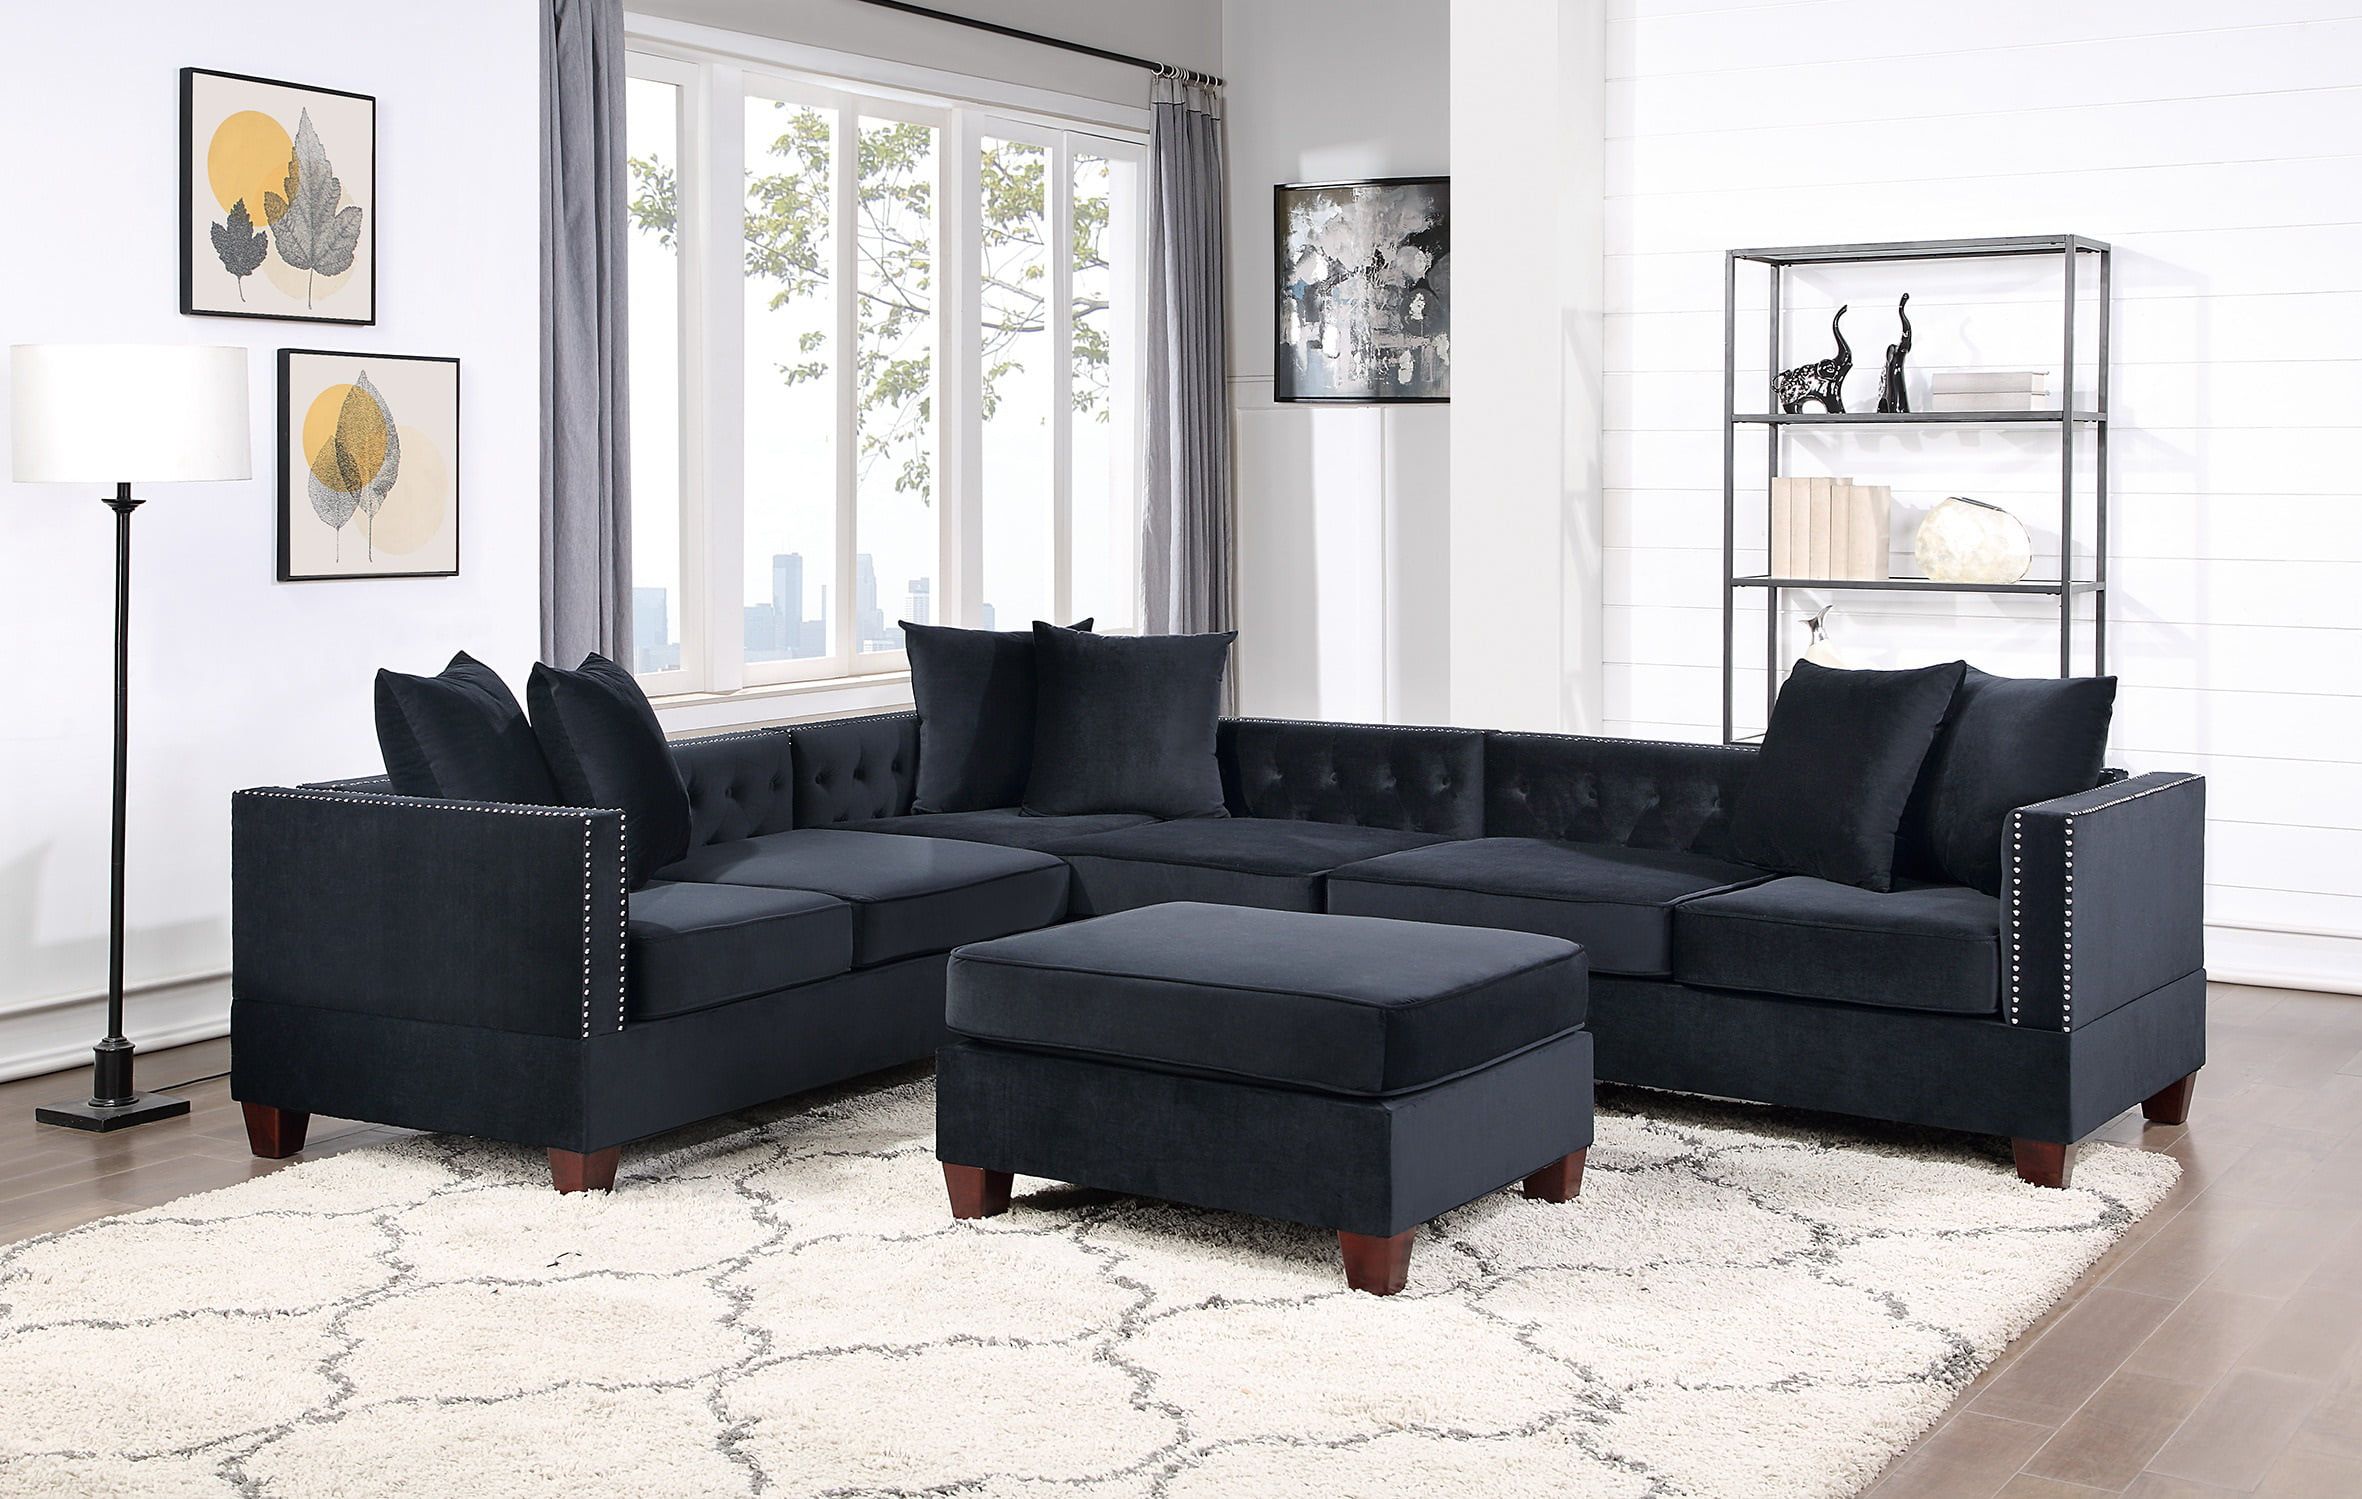 Black Velvet Fabric Solidwood Sectional 4pc Set Reversible Chaise /  Loveseats Ottoman Tufted Cushion Couch Pillows Living Room – Walmart With Sectional Sofas With Ottomans And Tufted Back Cushion (View 3 of 20)